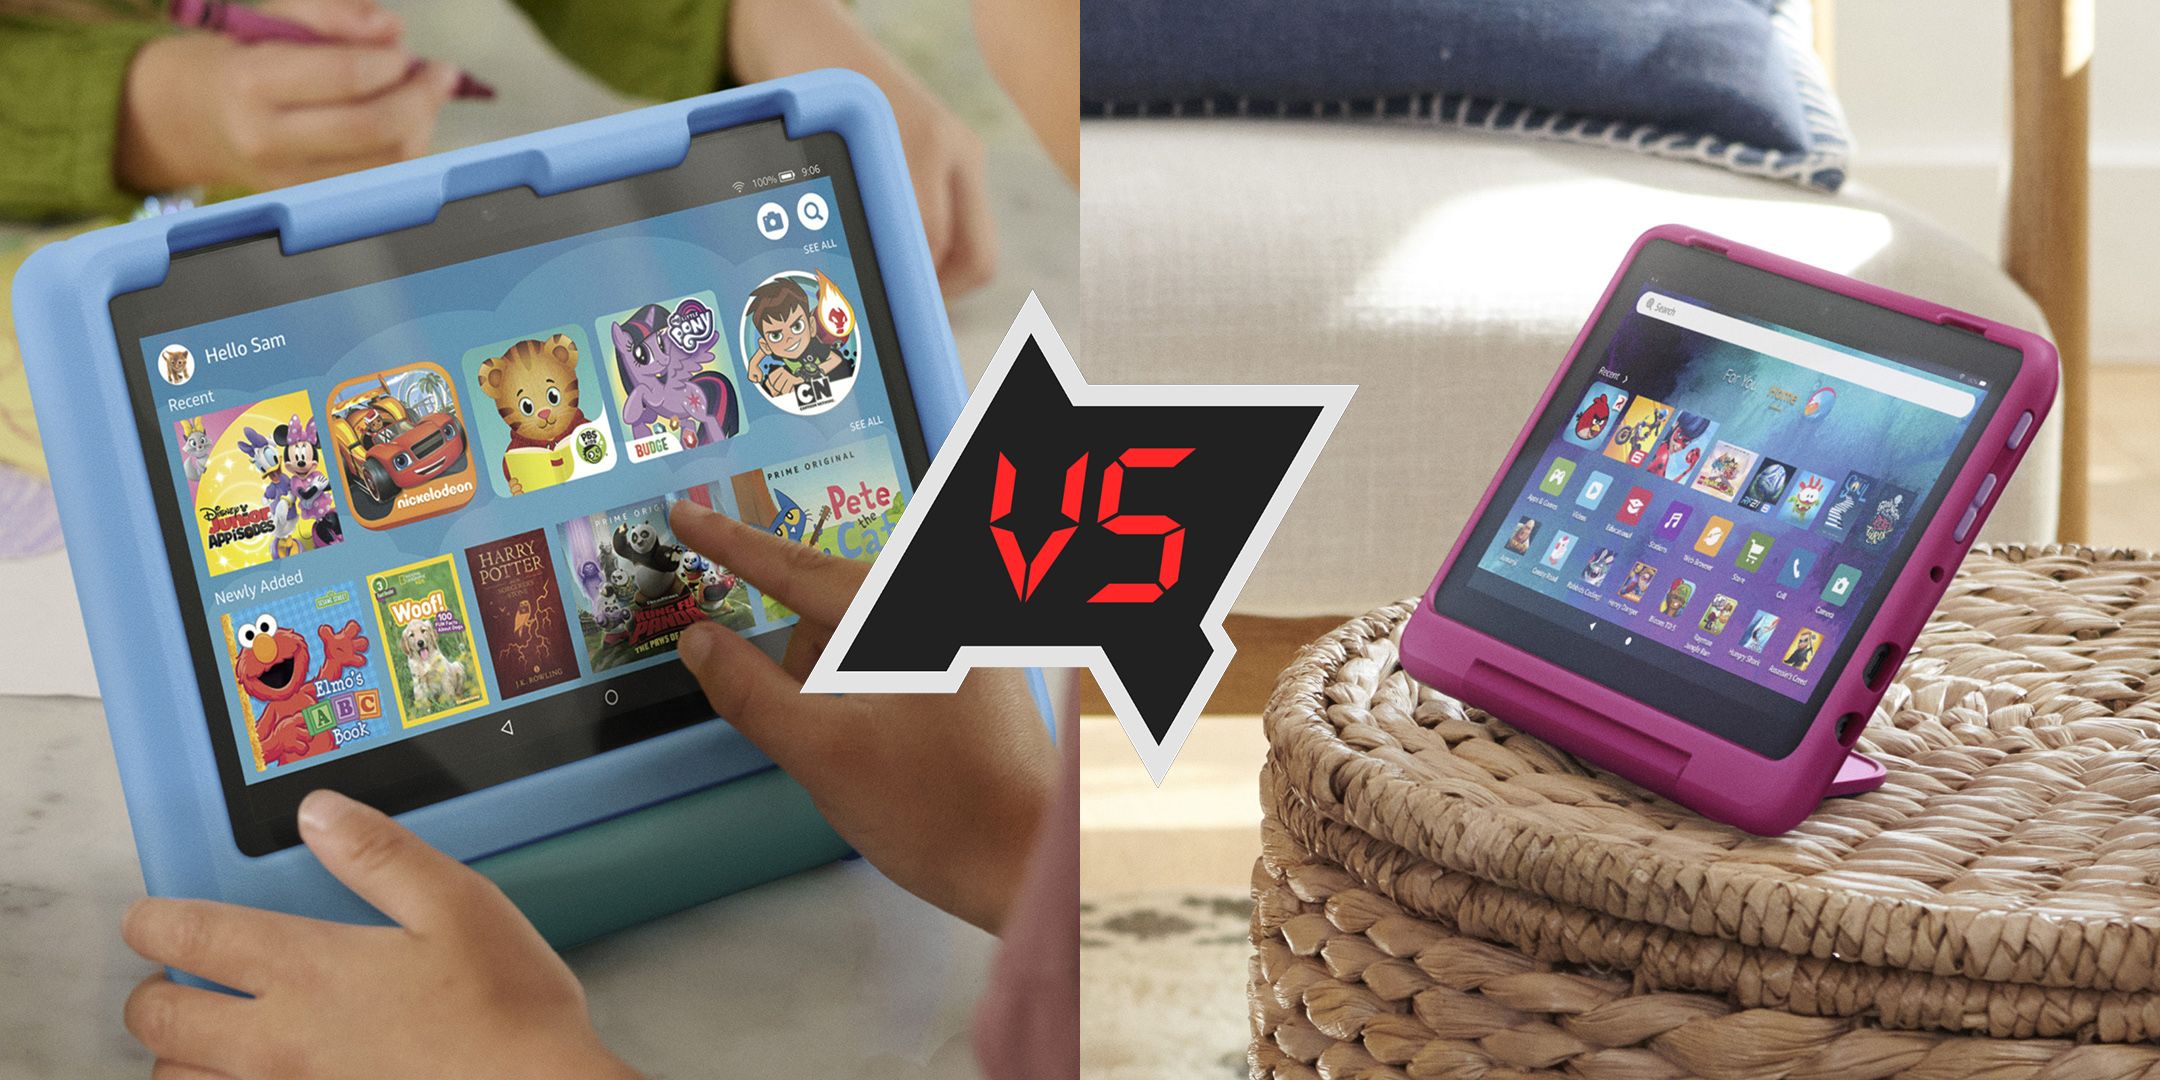 Fire HD 8 Kids vs Fire HD 8 Kids Pro: What's the difference?